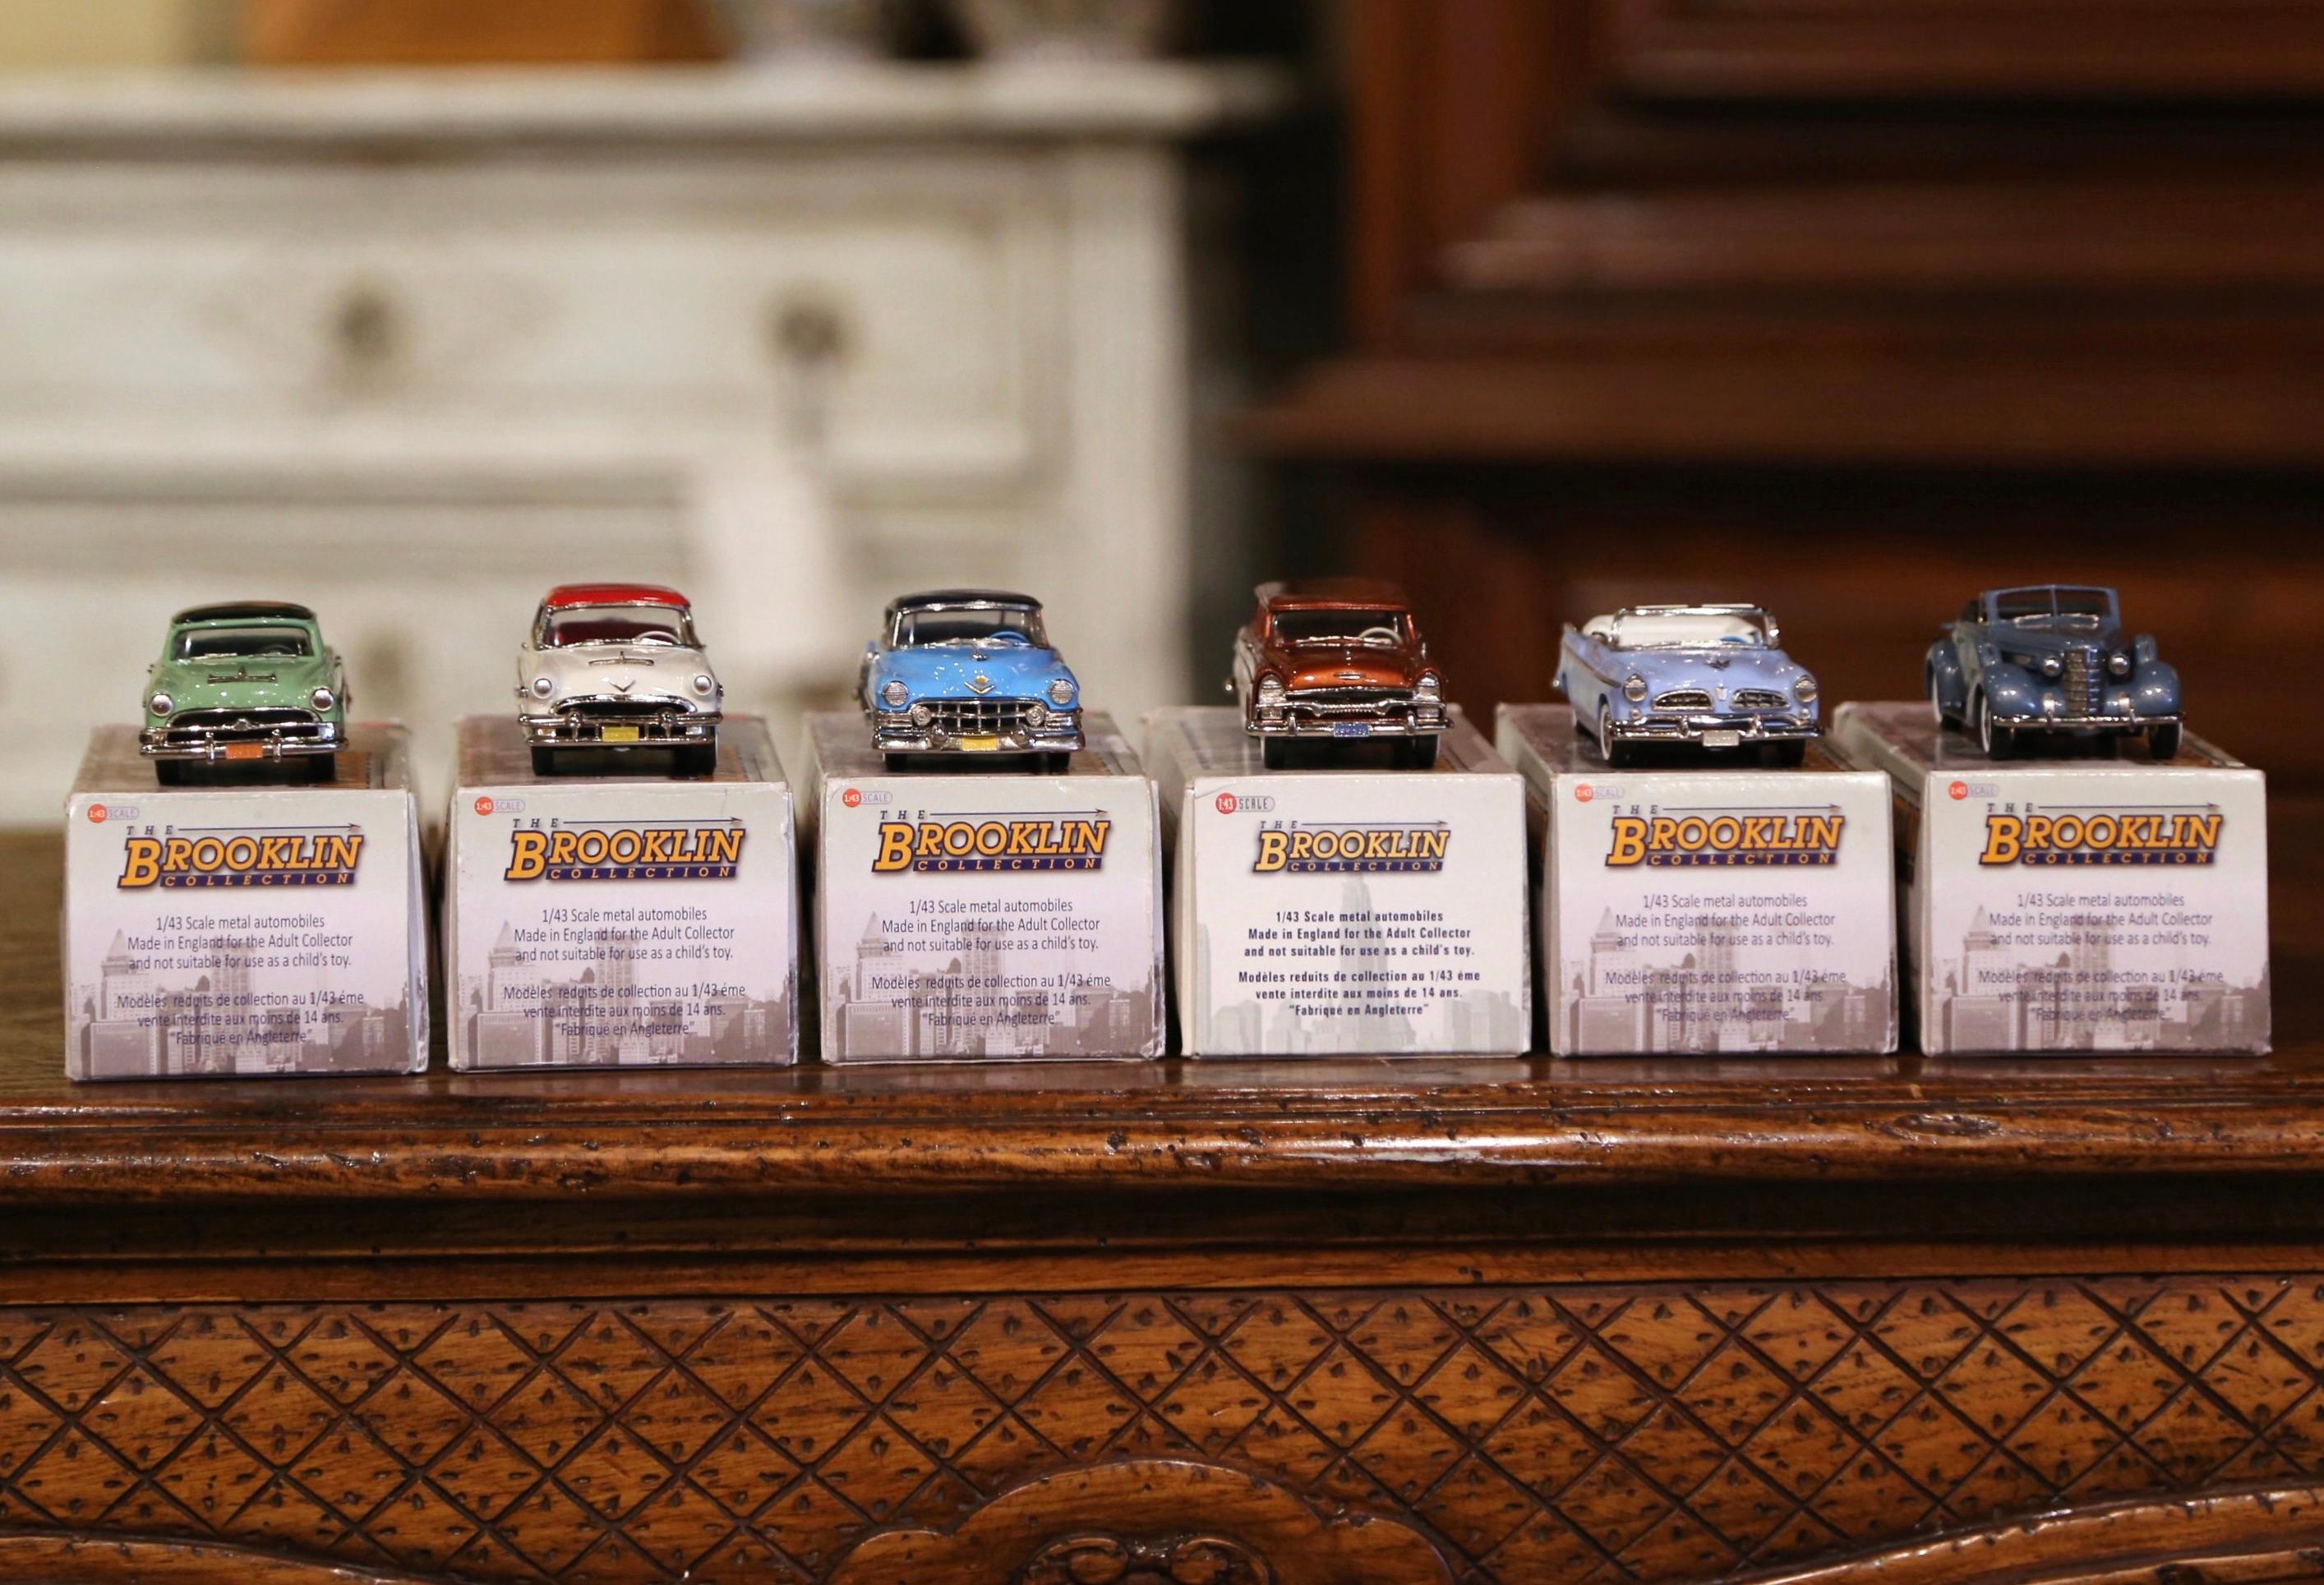 Decorate a shelf with this wonderful collection of miniature cars. Crafted in England circa 2010, the collection includes a 1952 Cadillac series 62 Coupe de Ville, a 1959 Chevrolet 4-door Station Wagon, a 1954 Monarch Lucerne Coupe, a 1954 Hudson